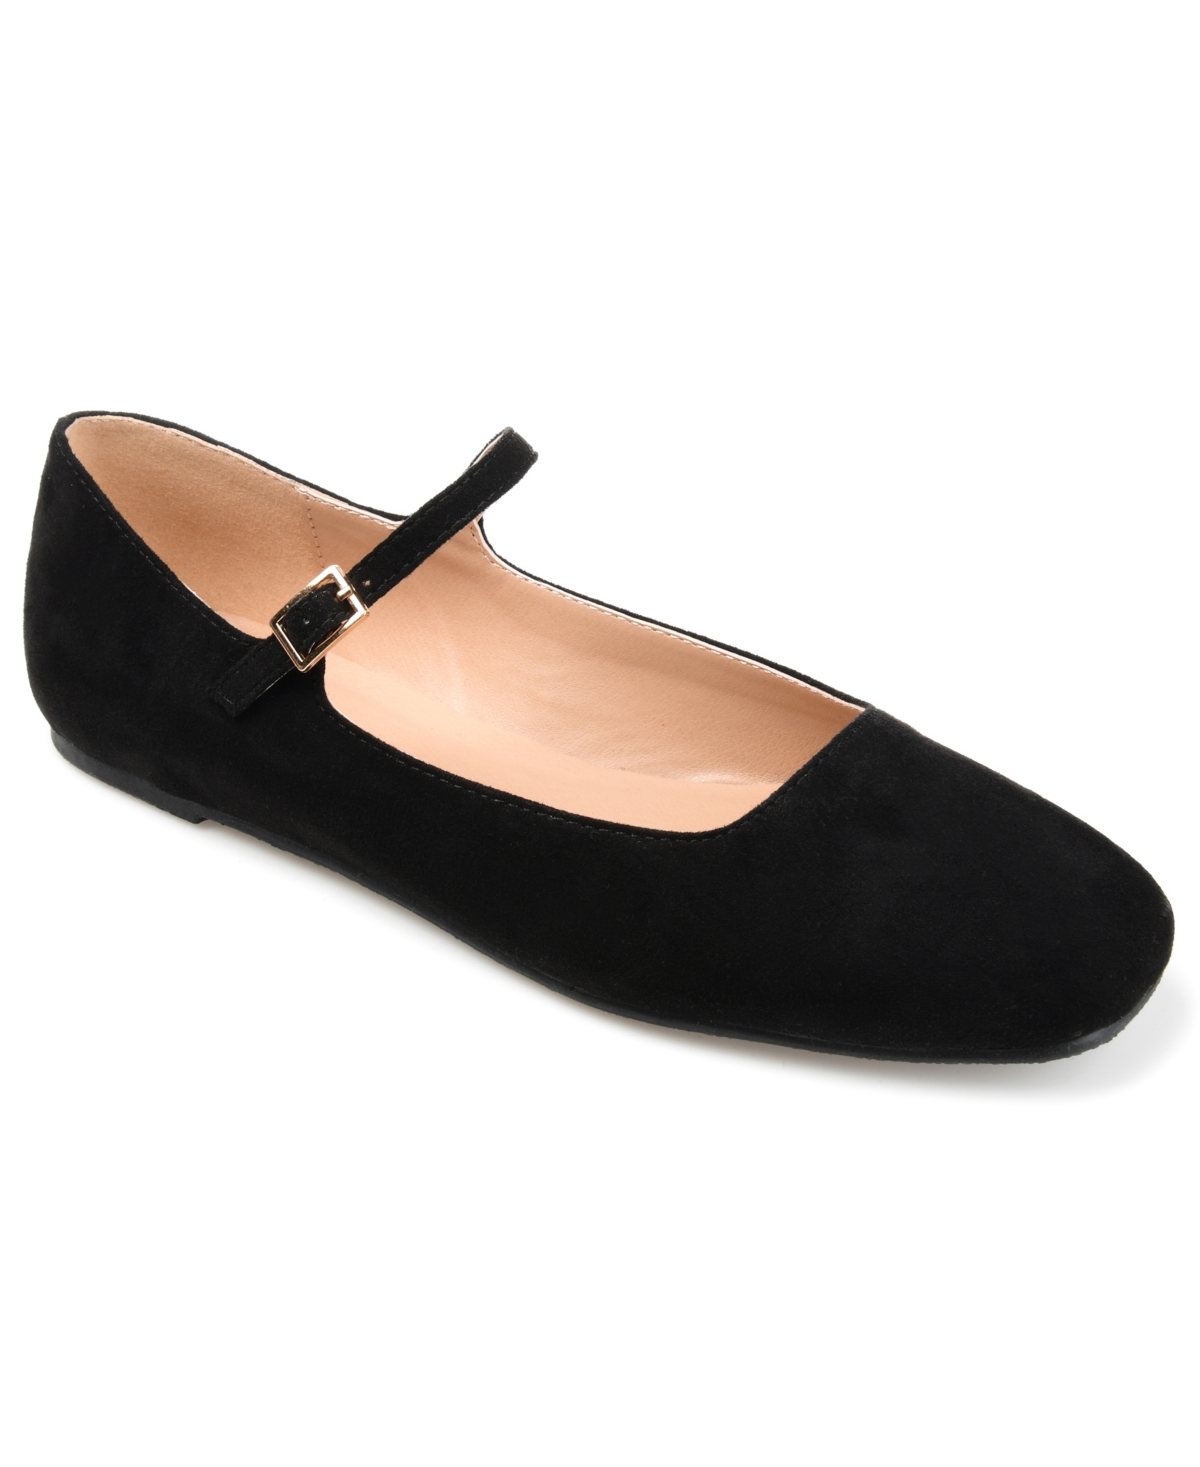 Retro Vintage Flats and Low Heel Shoes Journee Collection Womens Carrie Flat - Black $52.49 AT vintagedancer.com